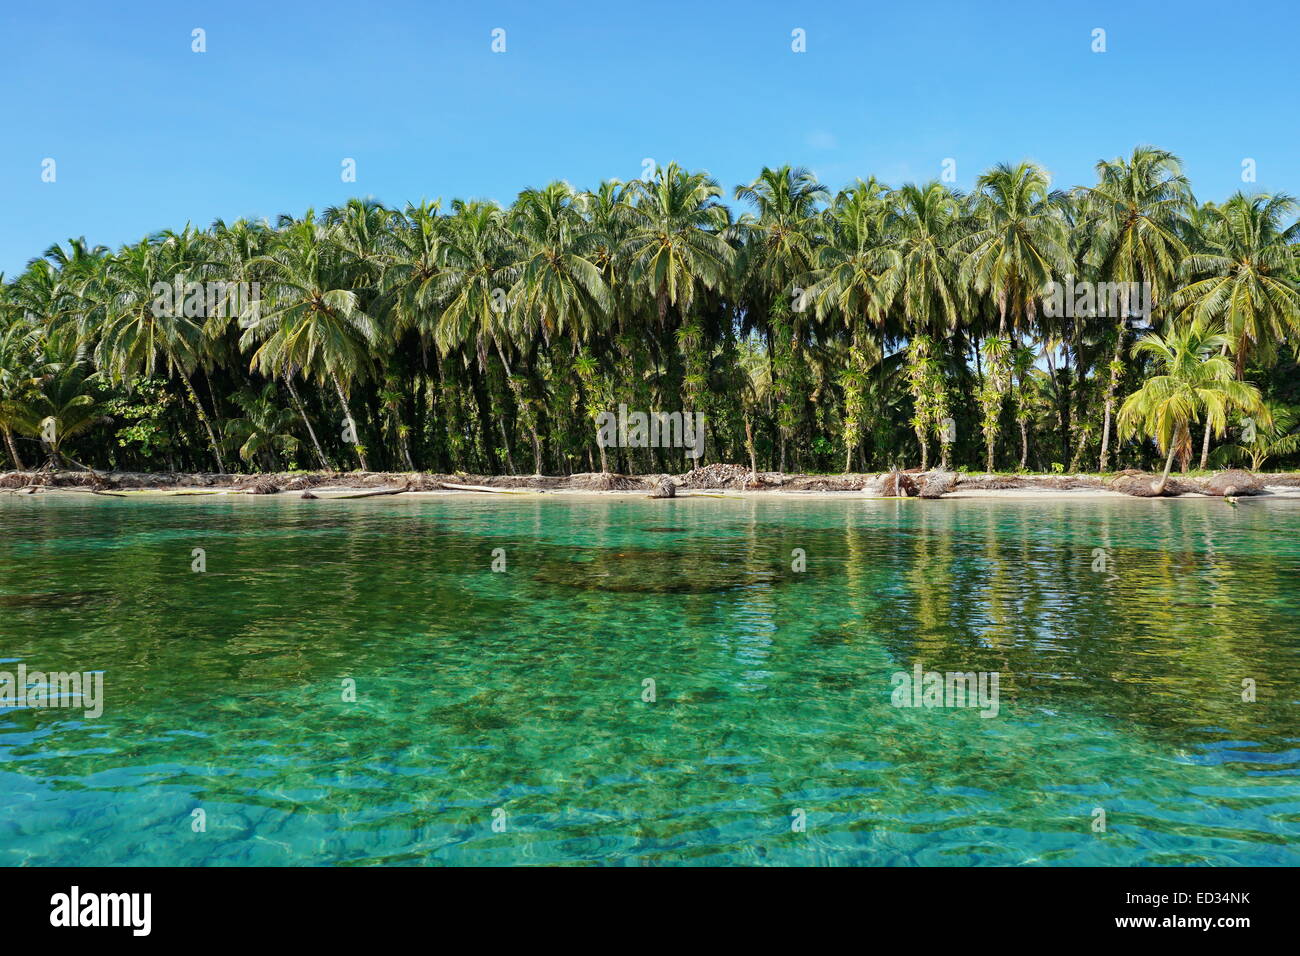 Lush coconut trees with epiphytes on tropical shore with clear water, Caribbean, Zapatillas islands, Bocas del Toro, Panama Stock Photo